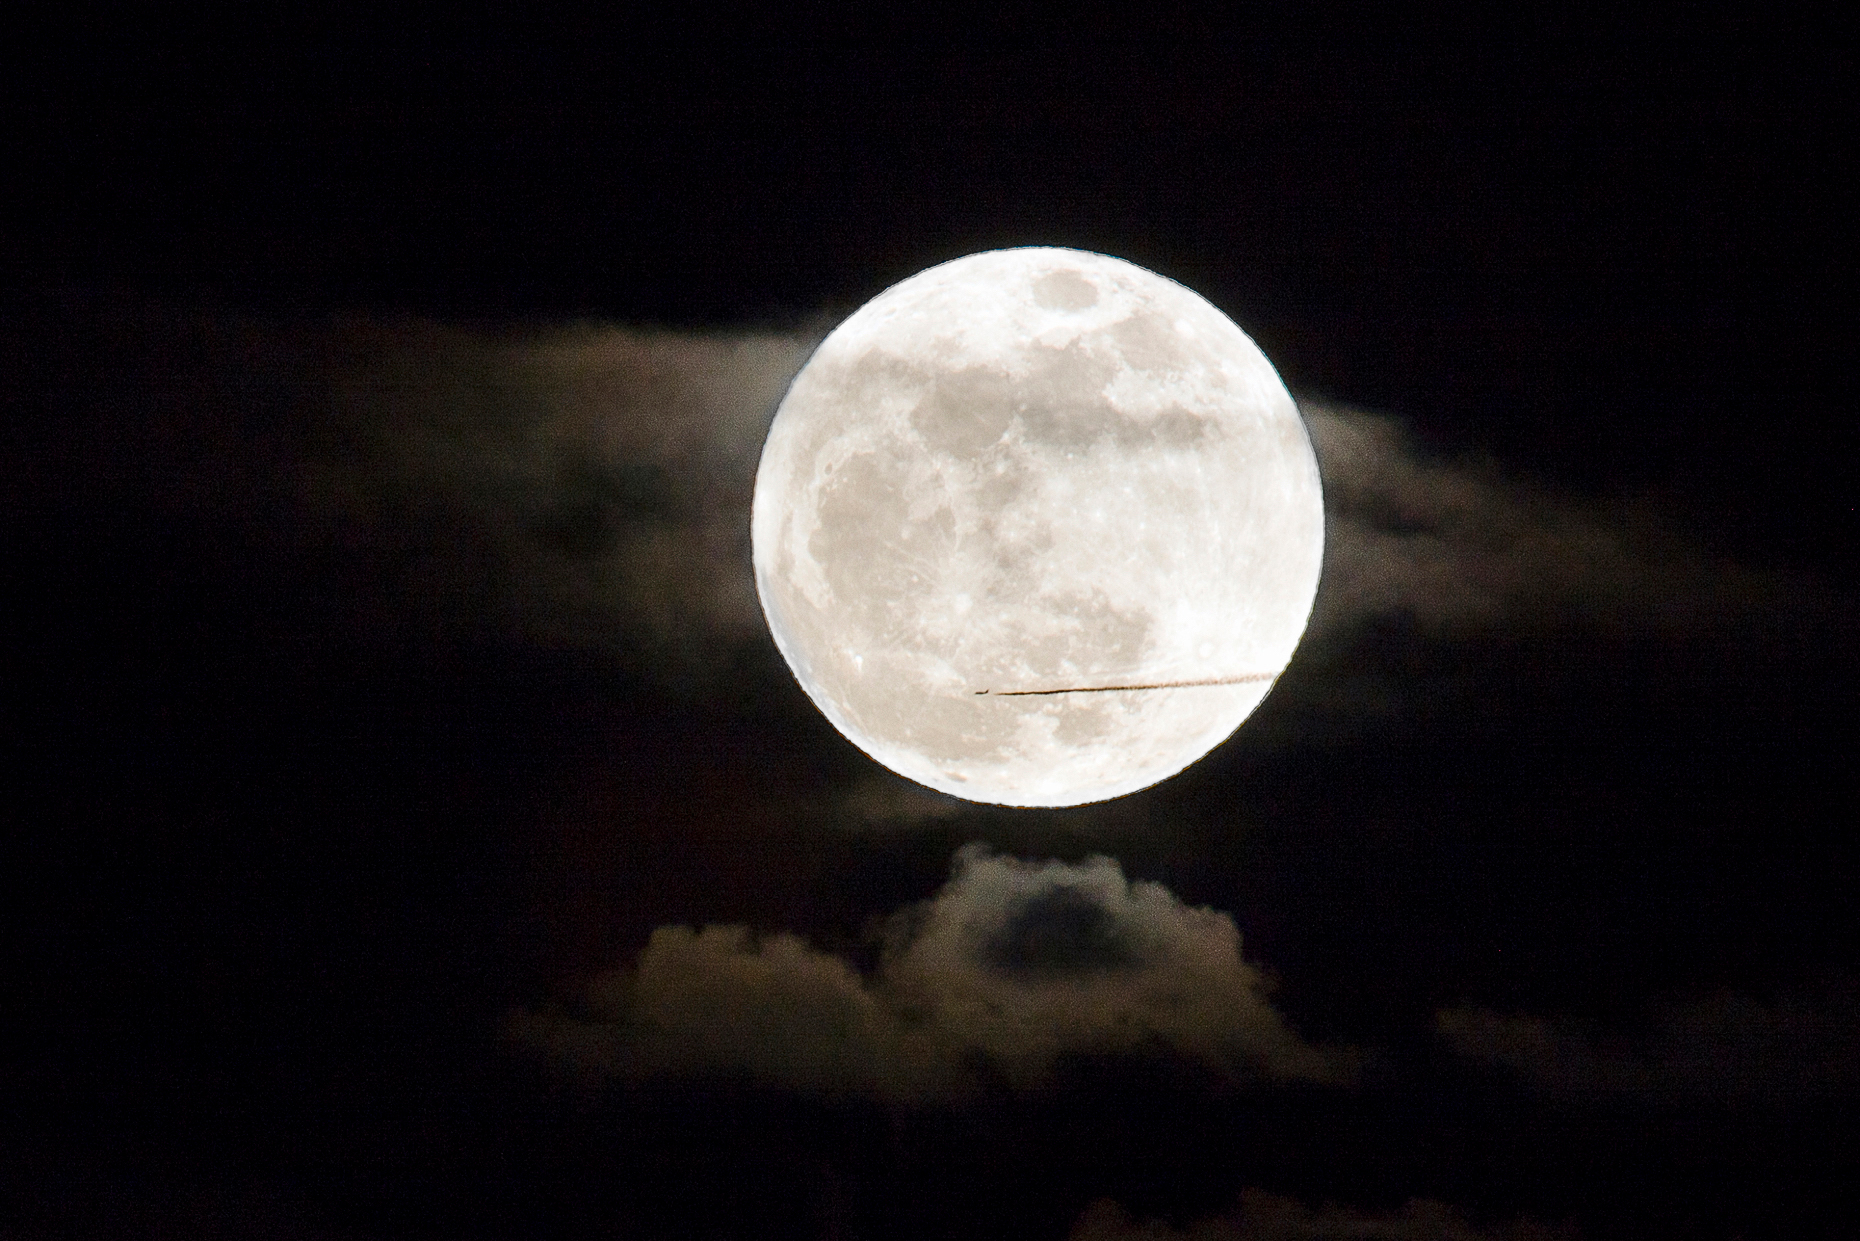 Commercial jet flies in front of a perigree full moon, or supermoon, rising over Salida, Colorado, USA